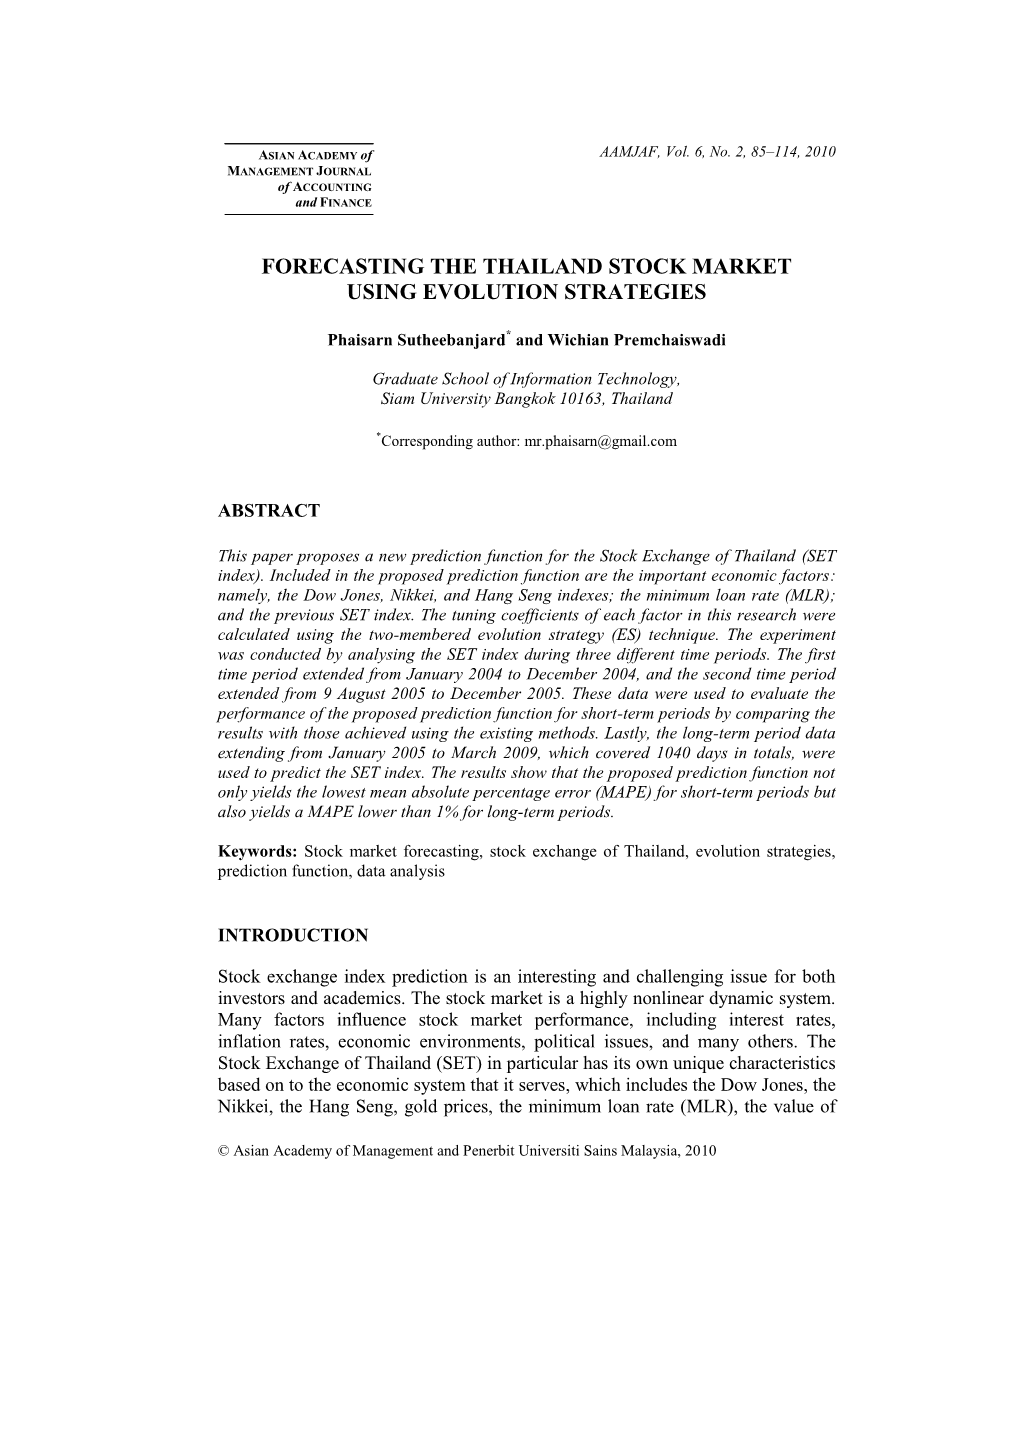 An Analysis and Prediction of Stock Exchange of Thailand Index